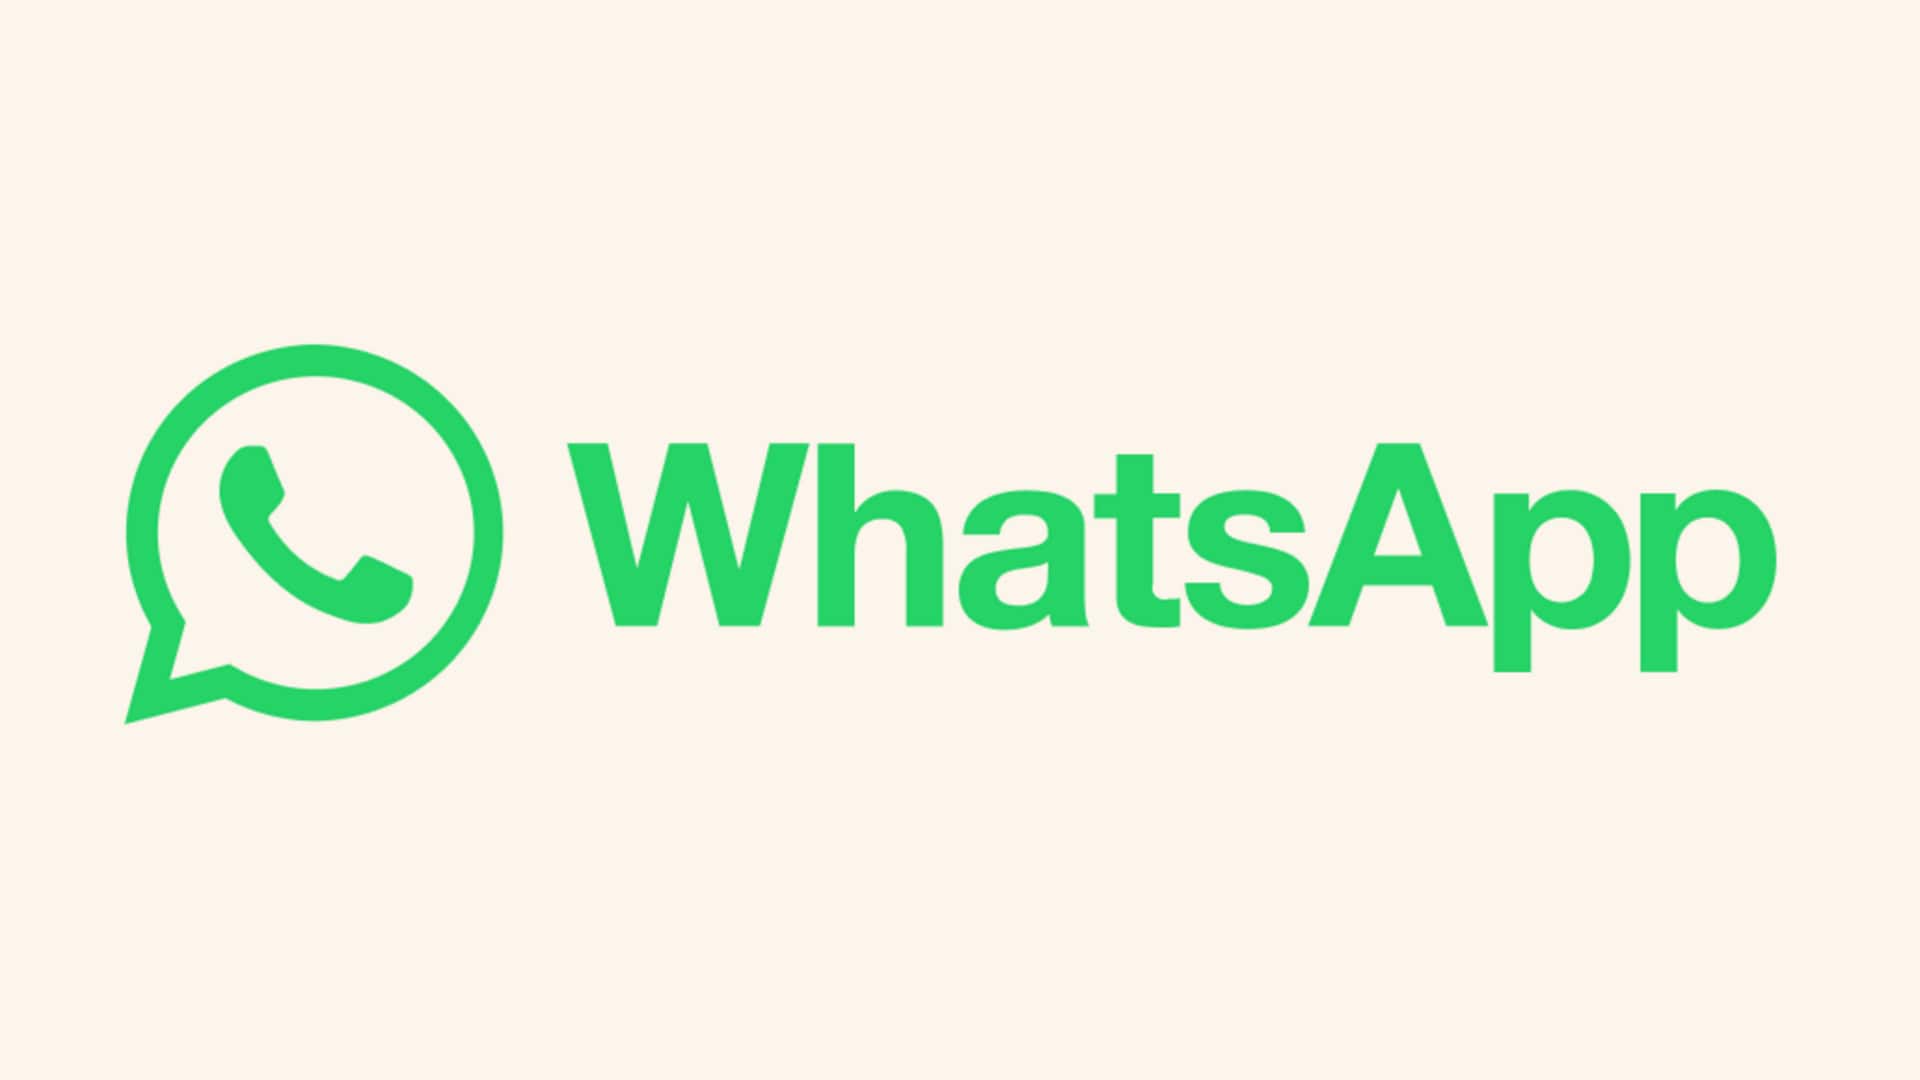 WhatsApp adds email verification feature for iPhone users